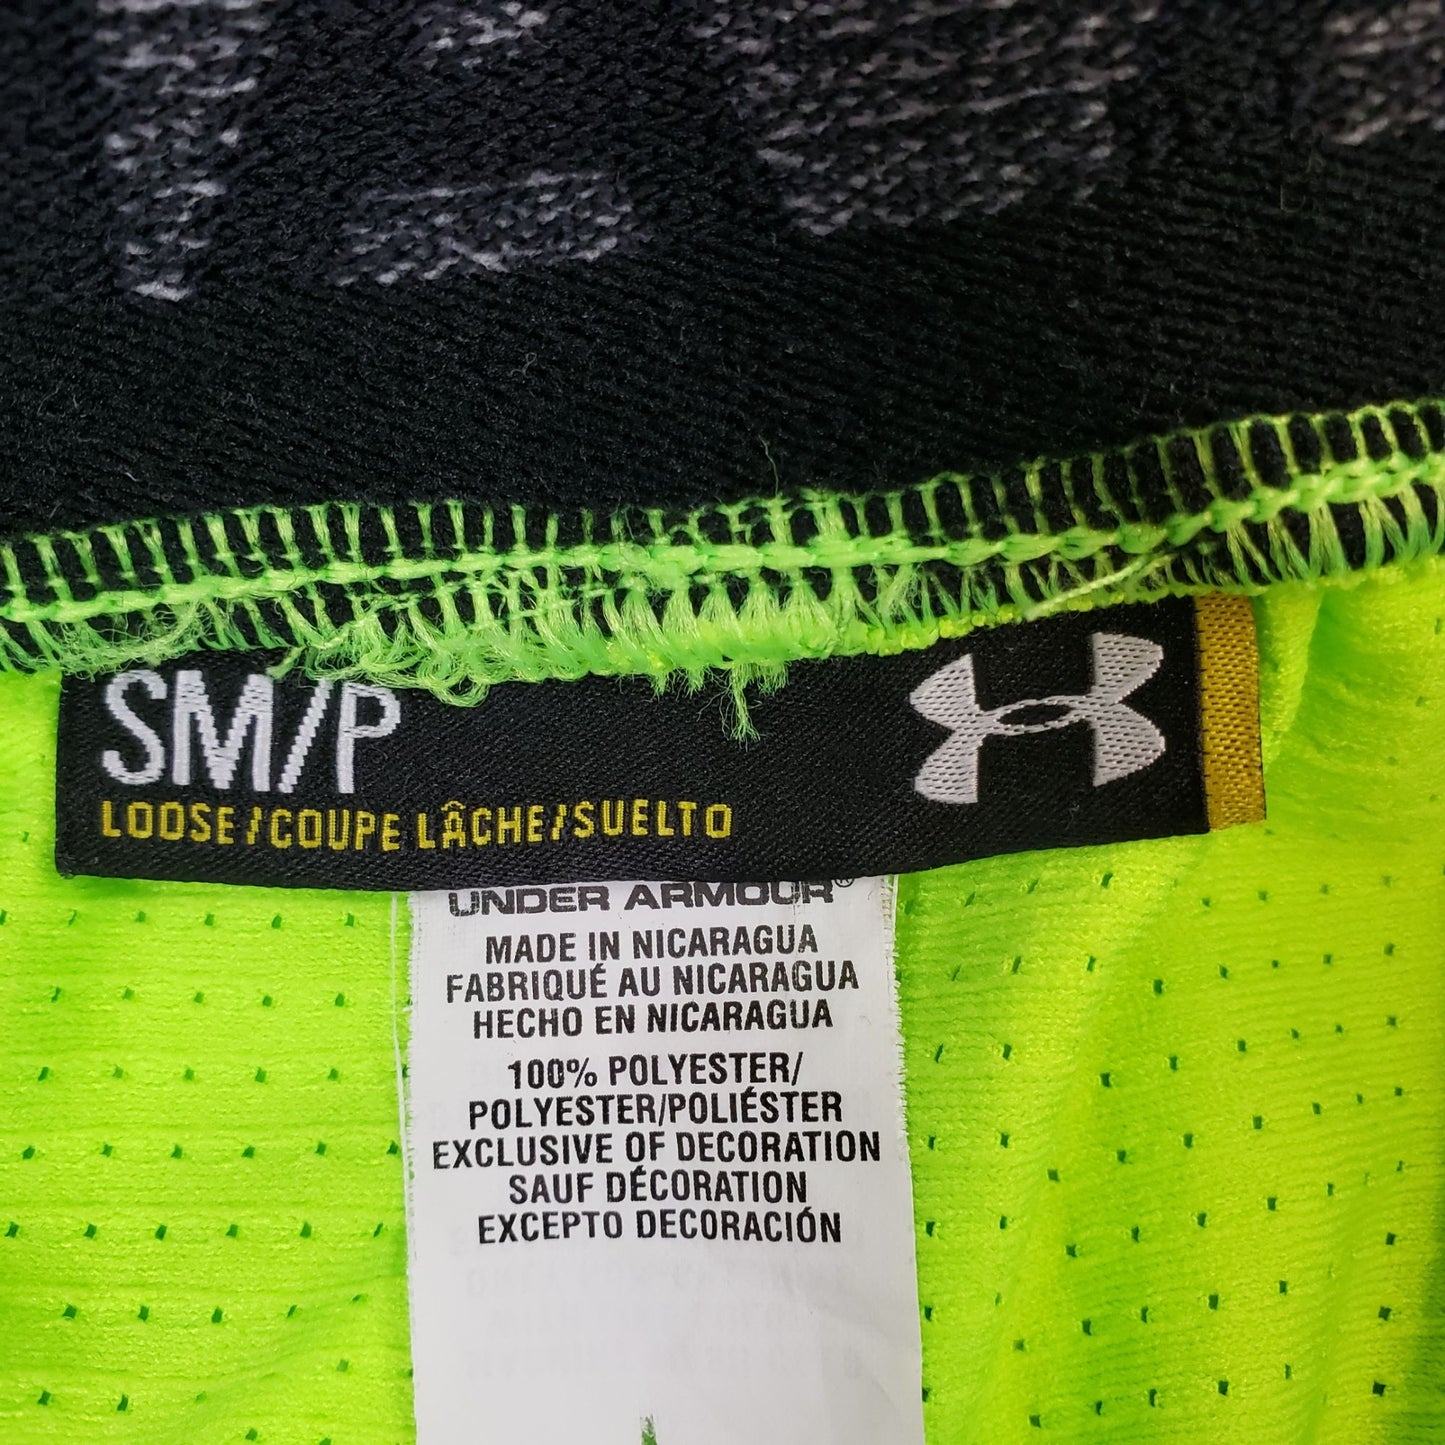 Under Armour Neon Yellow Mesh Activewear Shorts Size Small